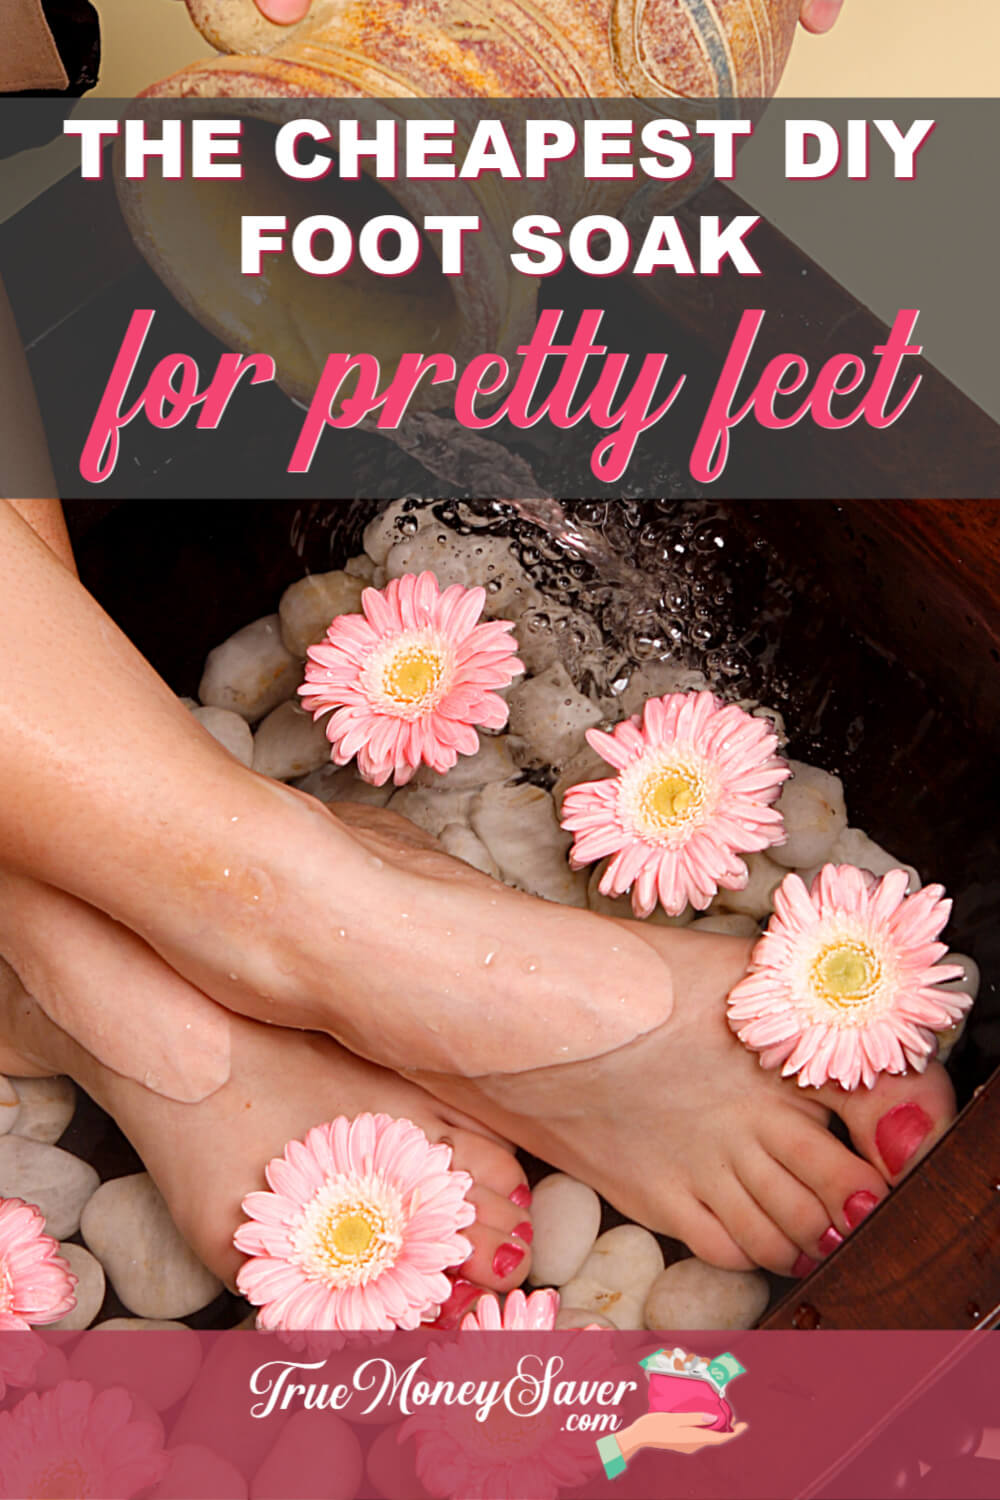 How To Remove The Dead Skin Cells On Your Feet